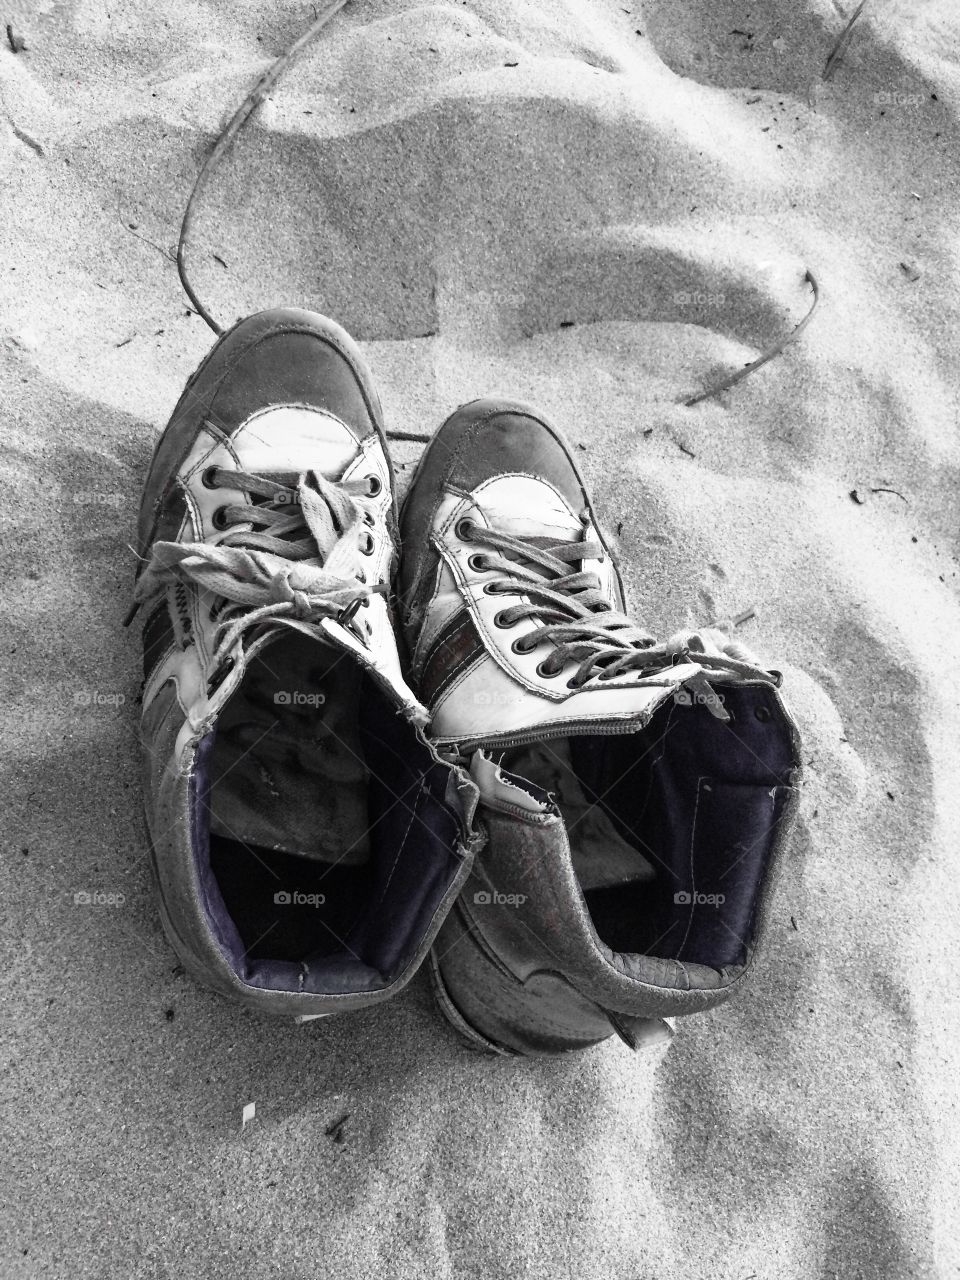 Shoes in sand